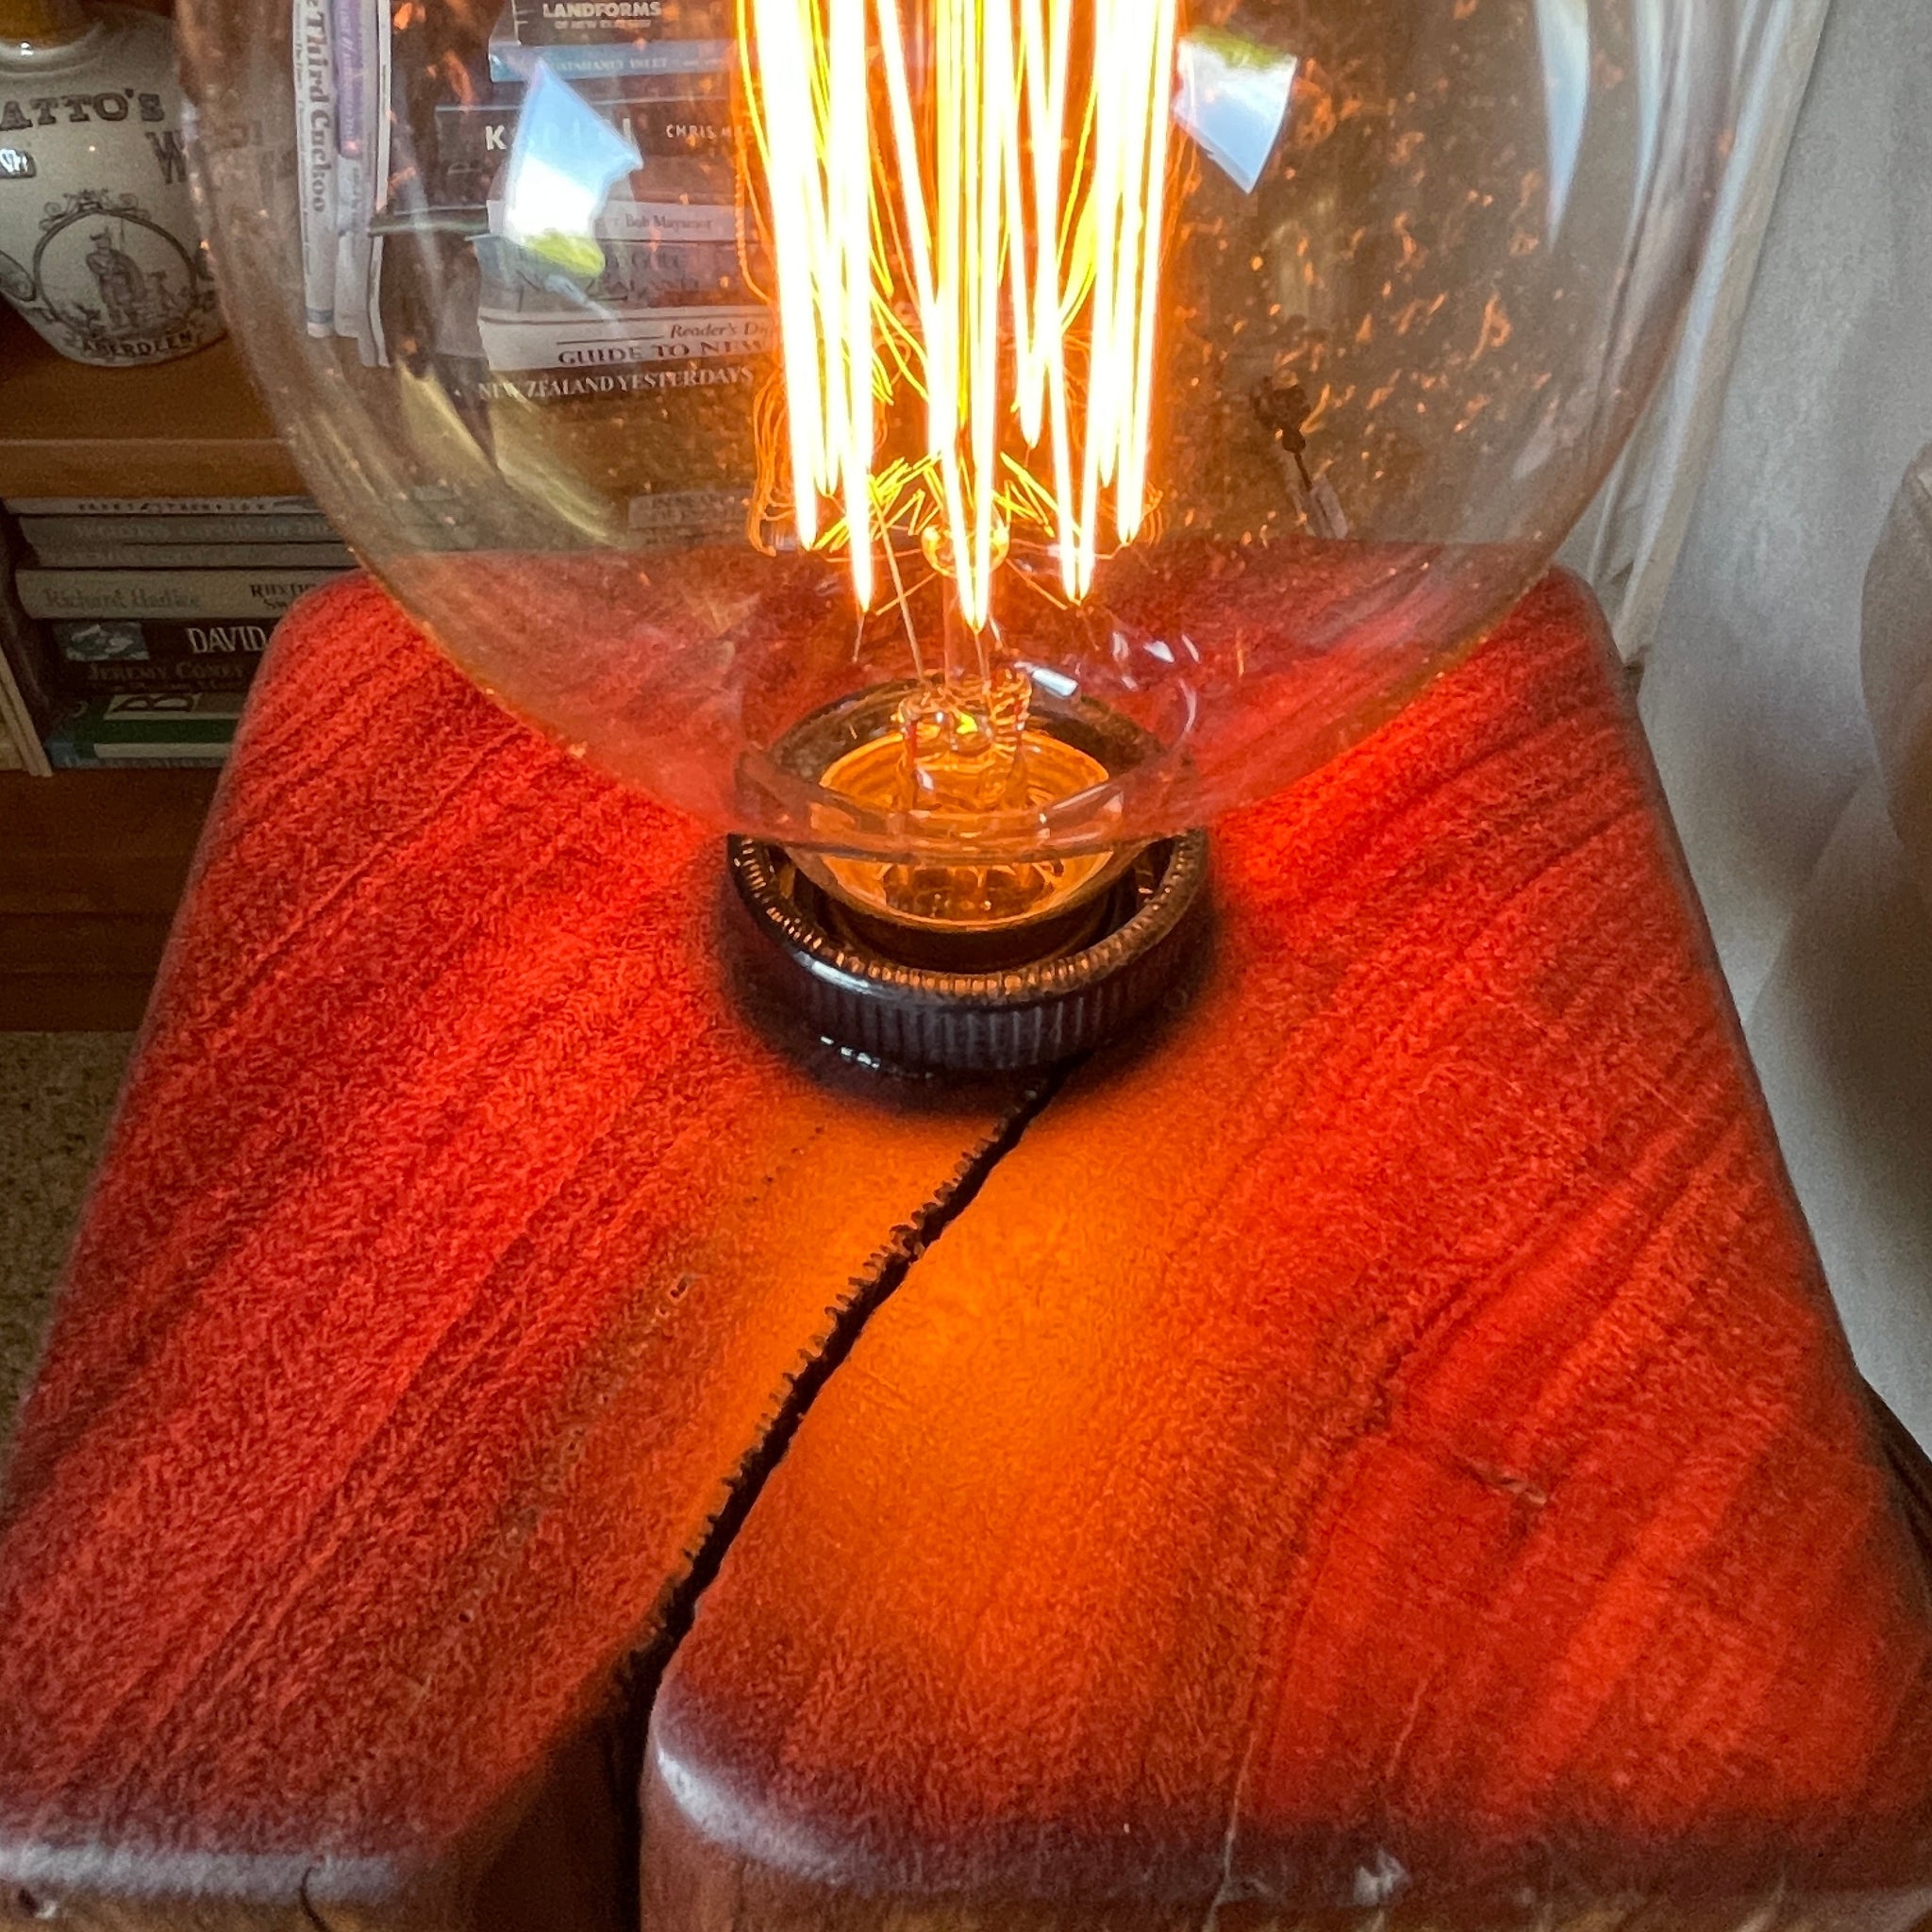 Shades at Grays Edison Lamp Edison Lamp - Telegraph Post #3 handcrafted lighting made in new zealand